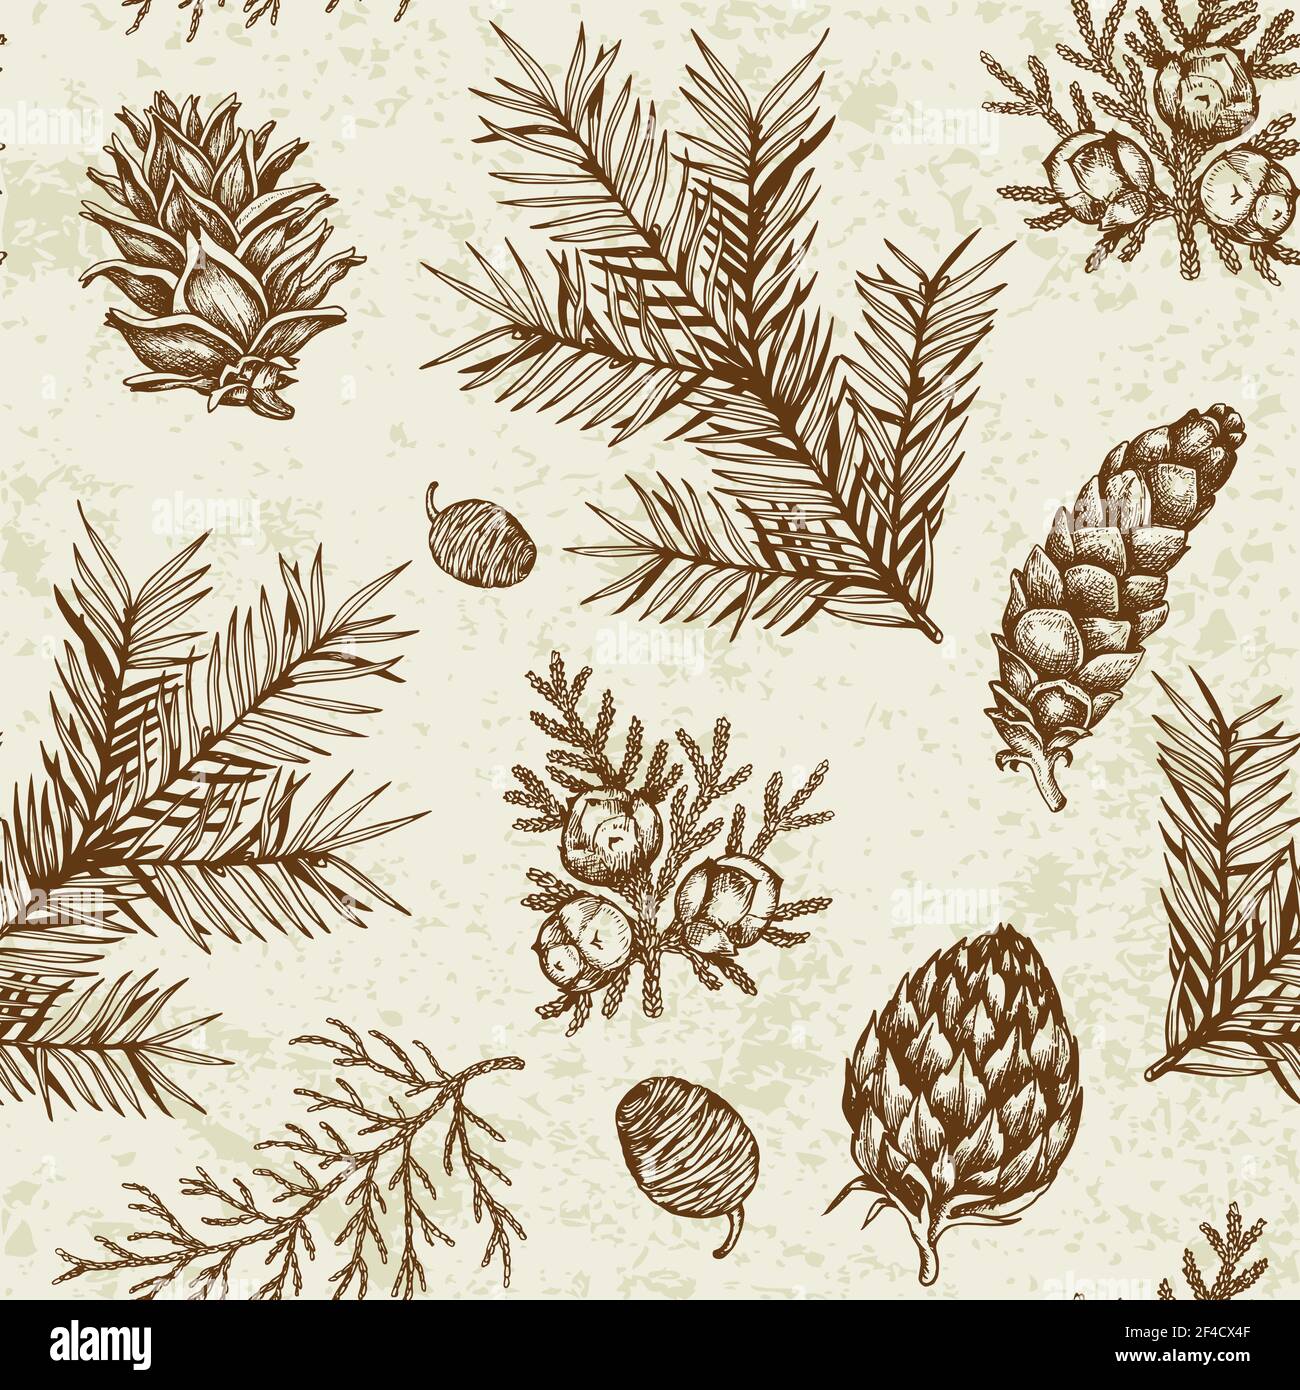 Vintage winter seamless pattern with evergreen plants. Decorative background for Christmas and new year. Hand drawn vector pattern. Stock Vector